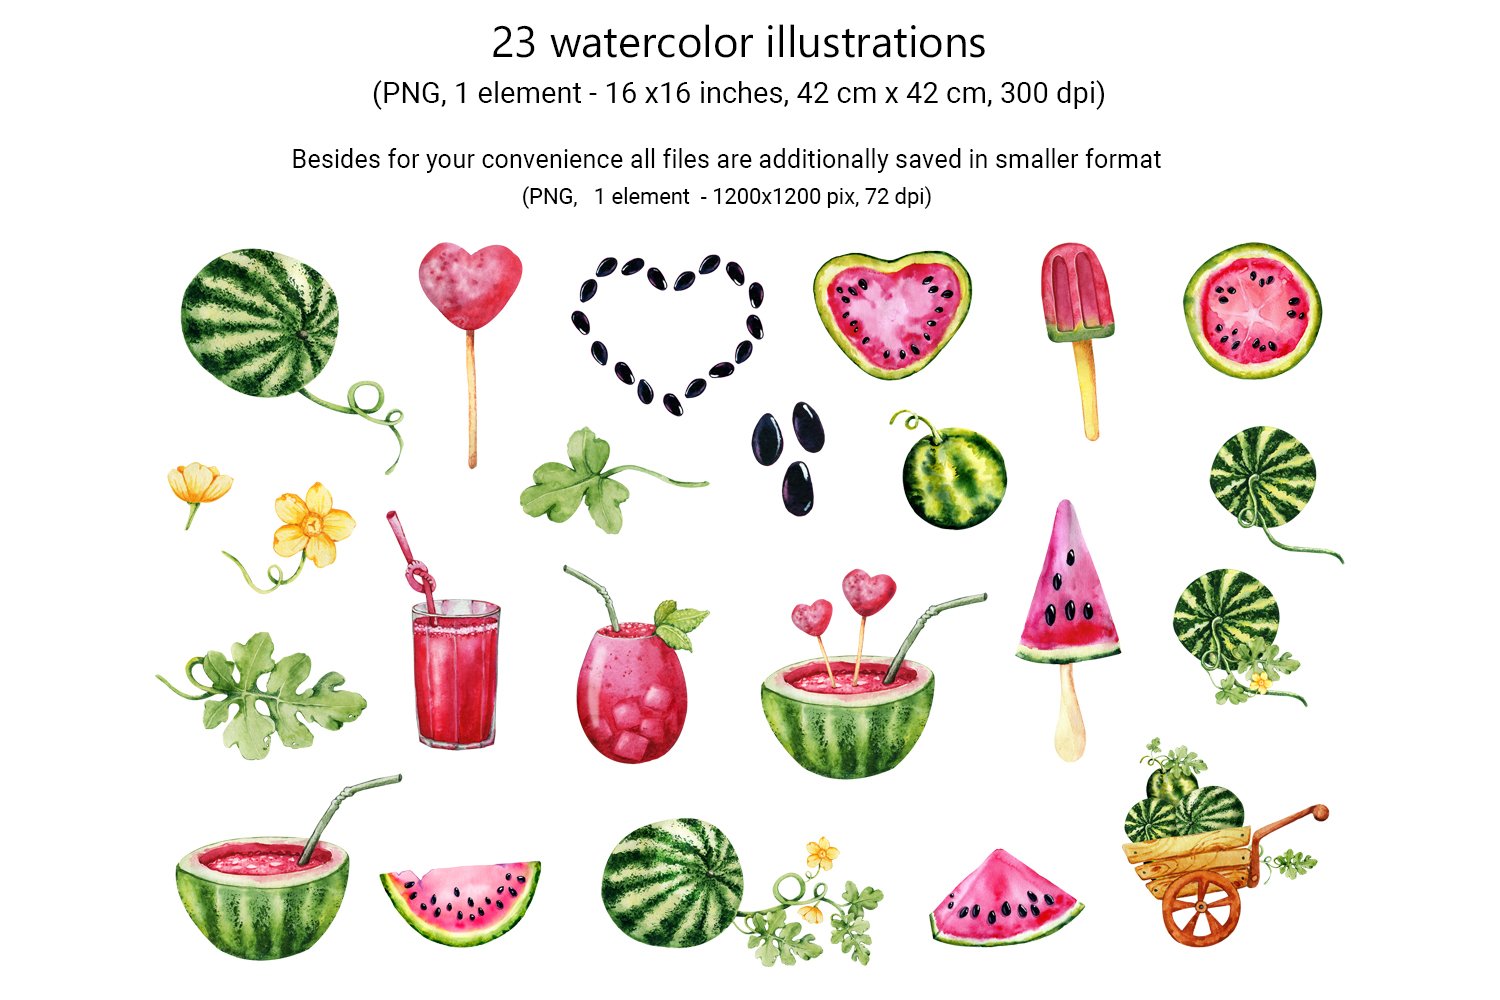 This set includes 23 watercolor illustrations.